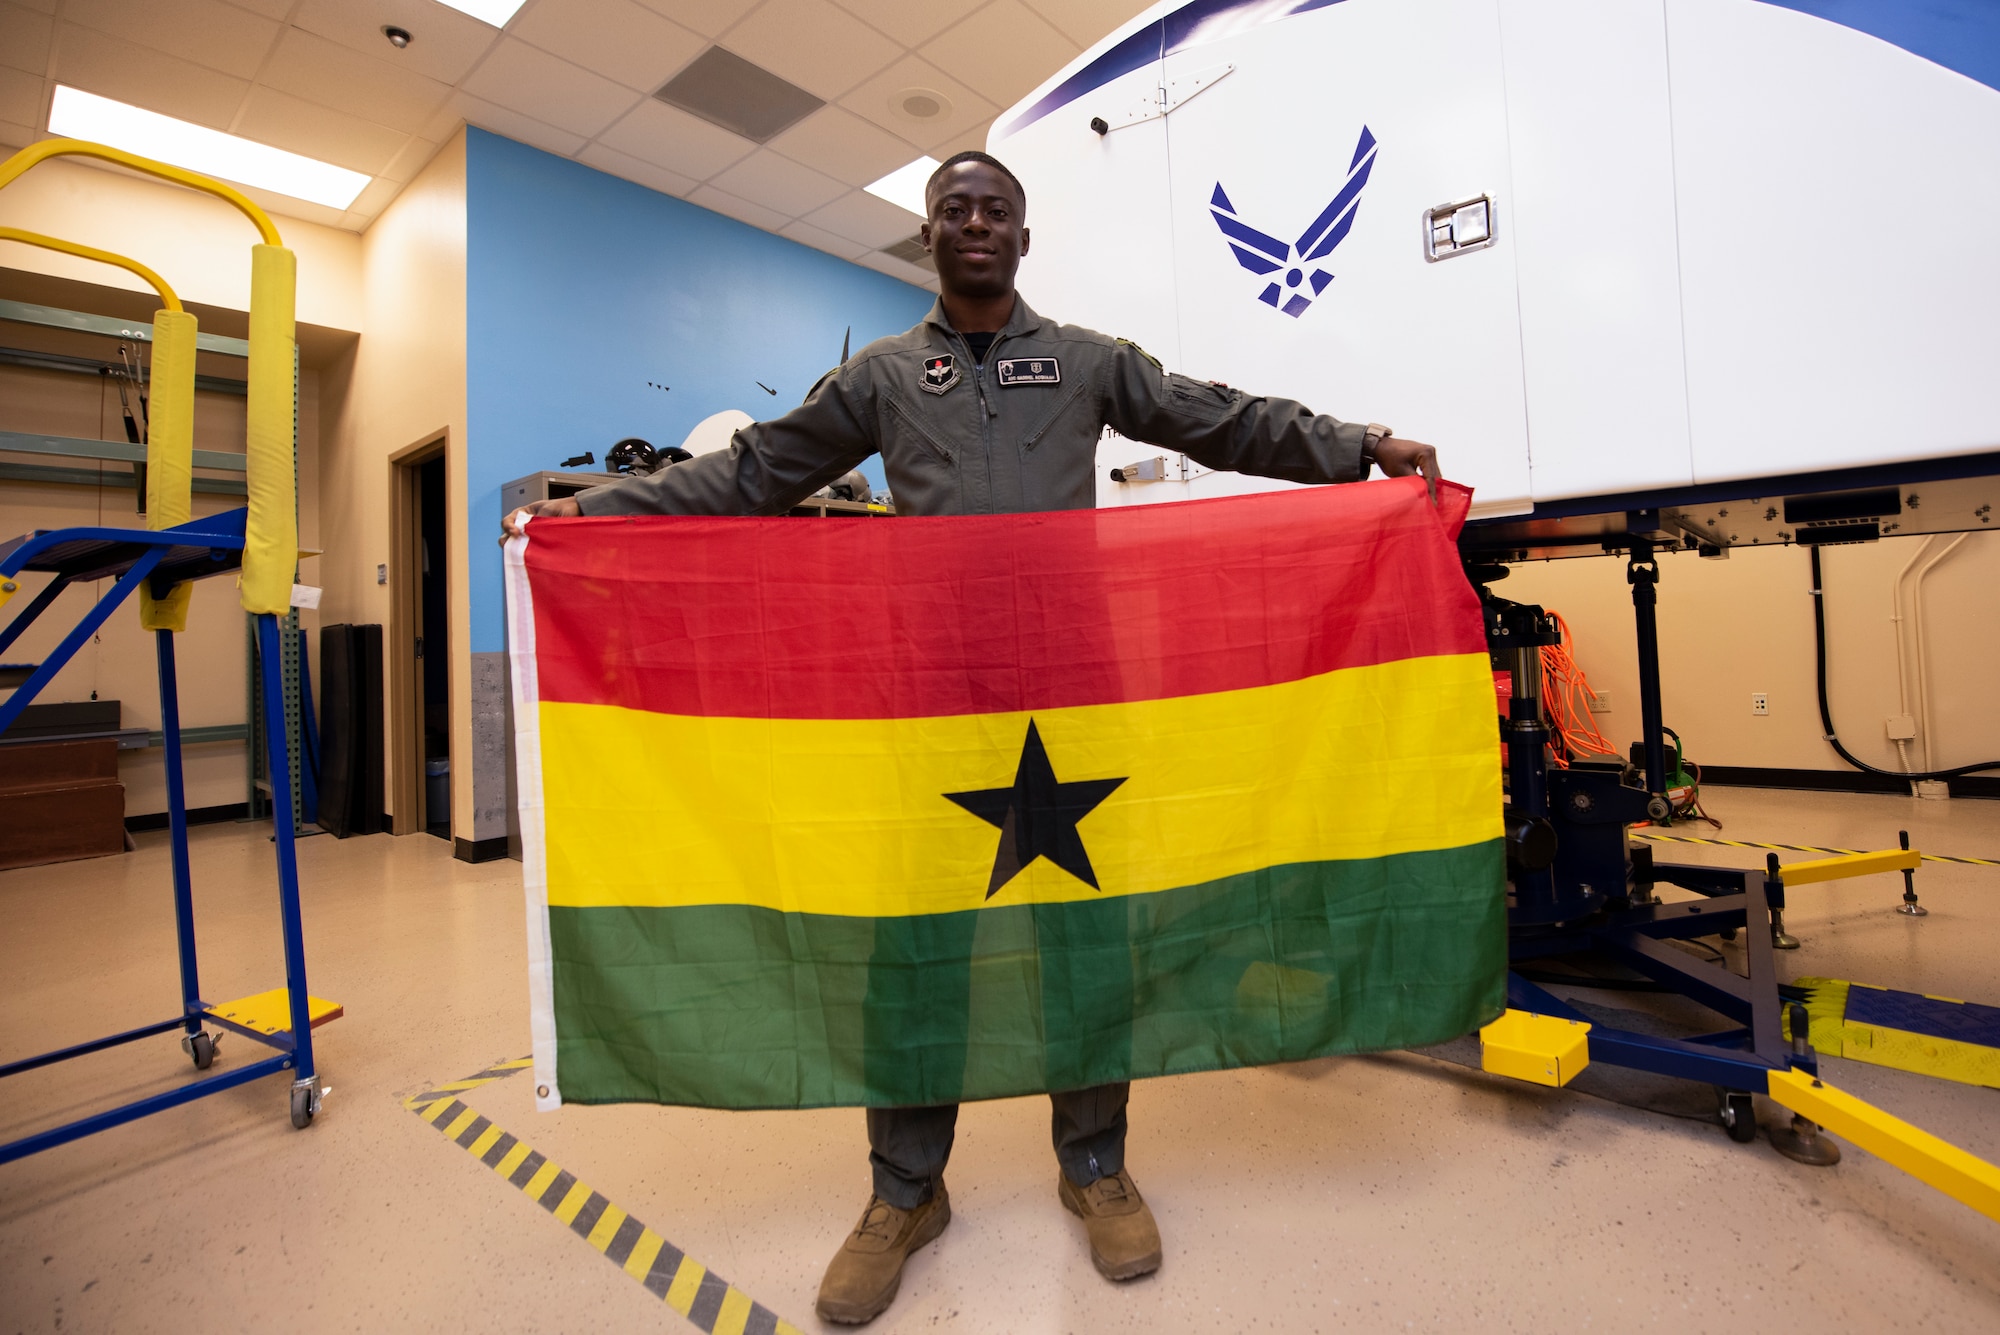 Airman 1st Class Gaddiel Acquaah, a 47th Operations Support Squadron aerospace physiology technician, holds a Ghanaian flag at Laughlin Air Force Base, Texas, Oct. 2, 2020. Acquaah recently received his U.S. citizenship through serving in the U.S. Air Force. Acquaah trains aircrews on everything from handling extreme G-force to egress training. (U.S. Air Force photo by Senior Airman Marco A. Gomez)